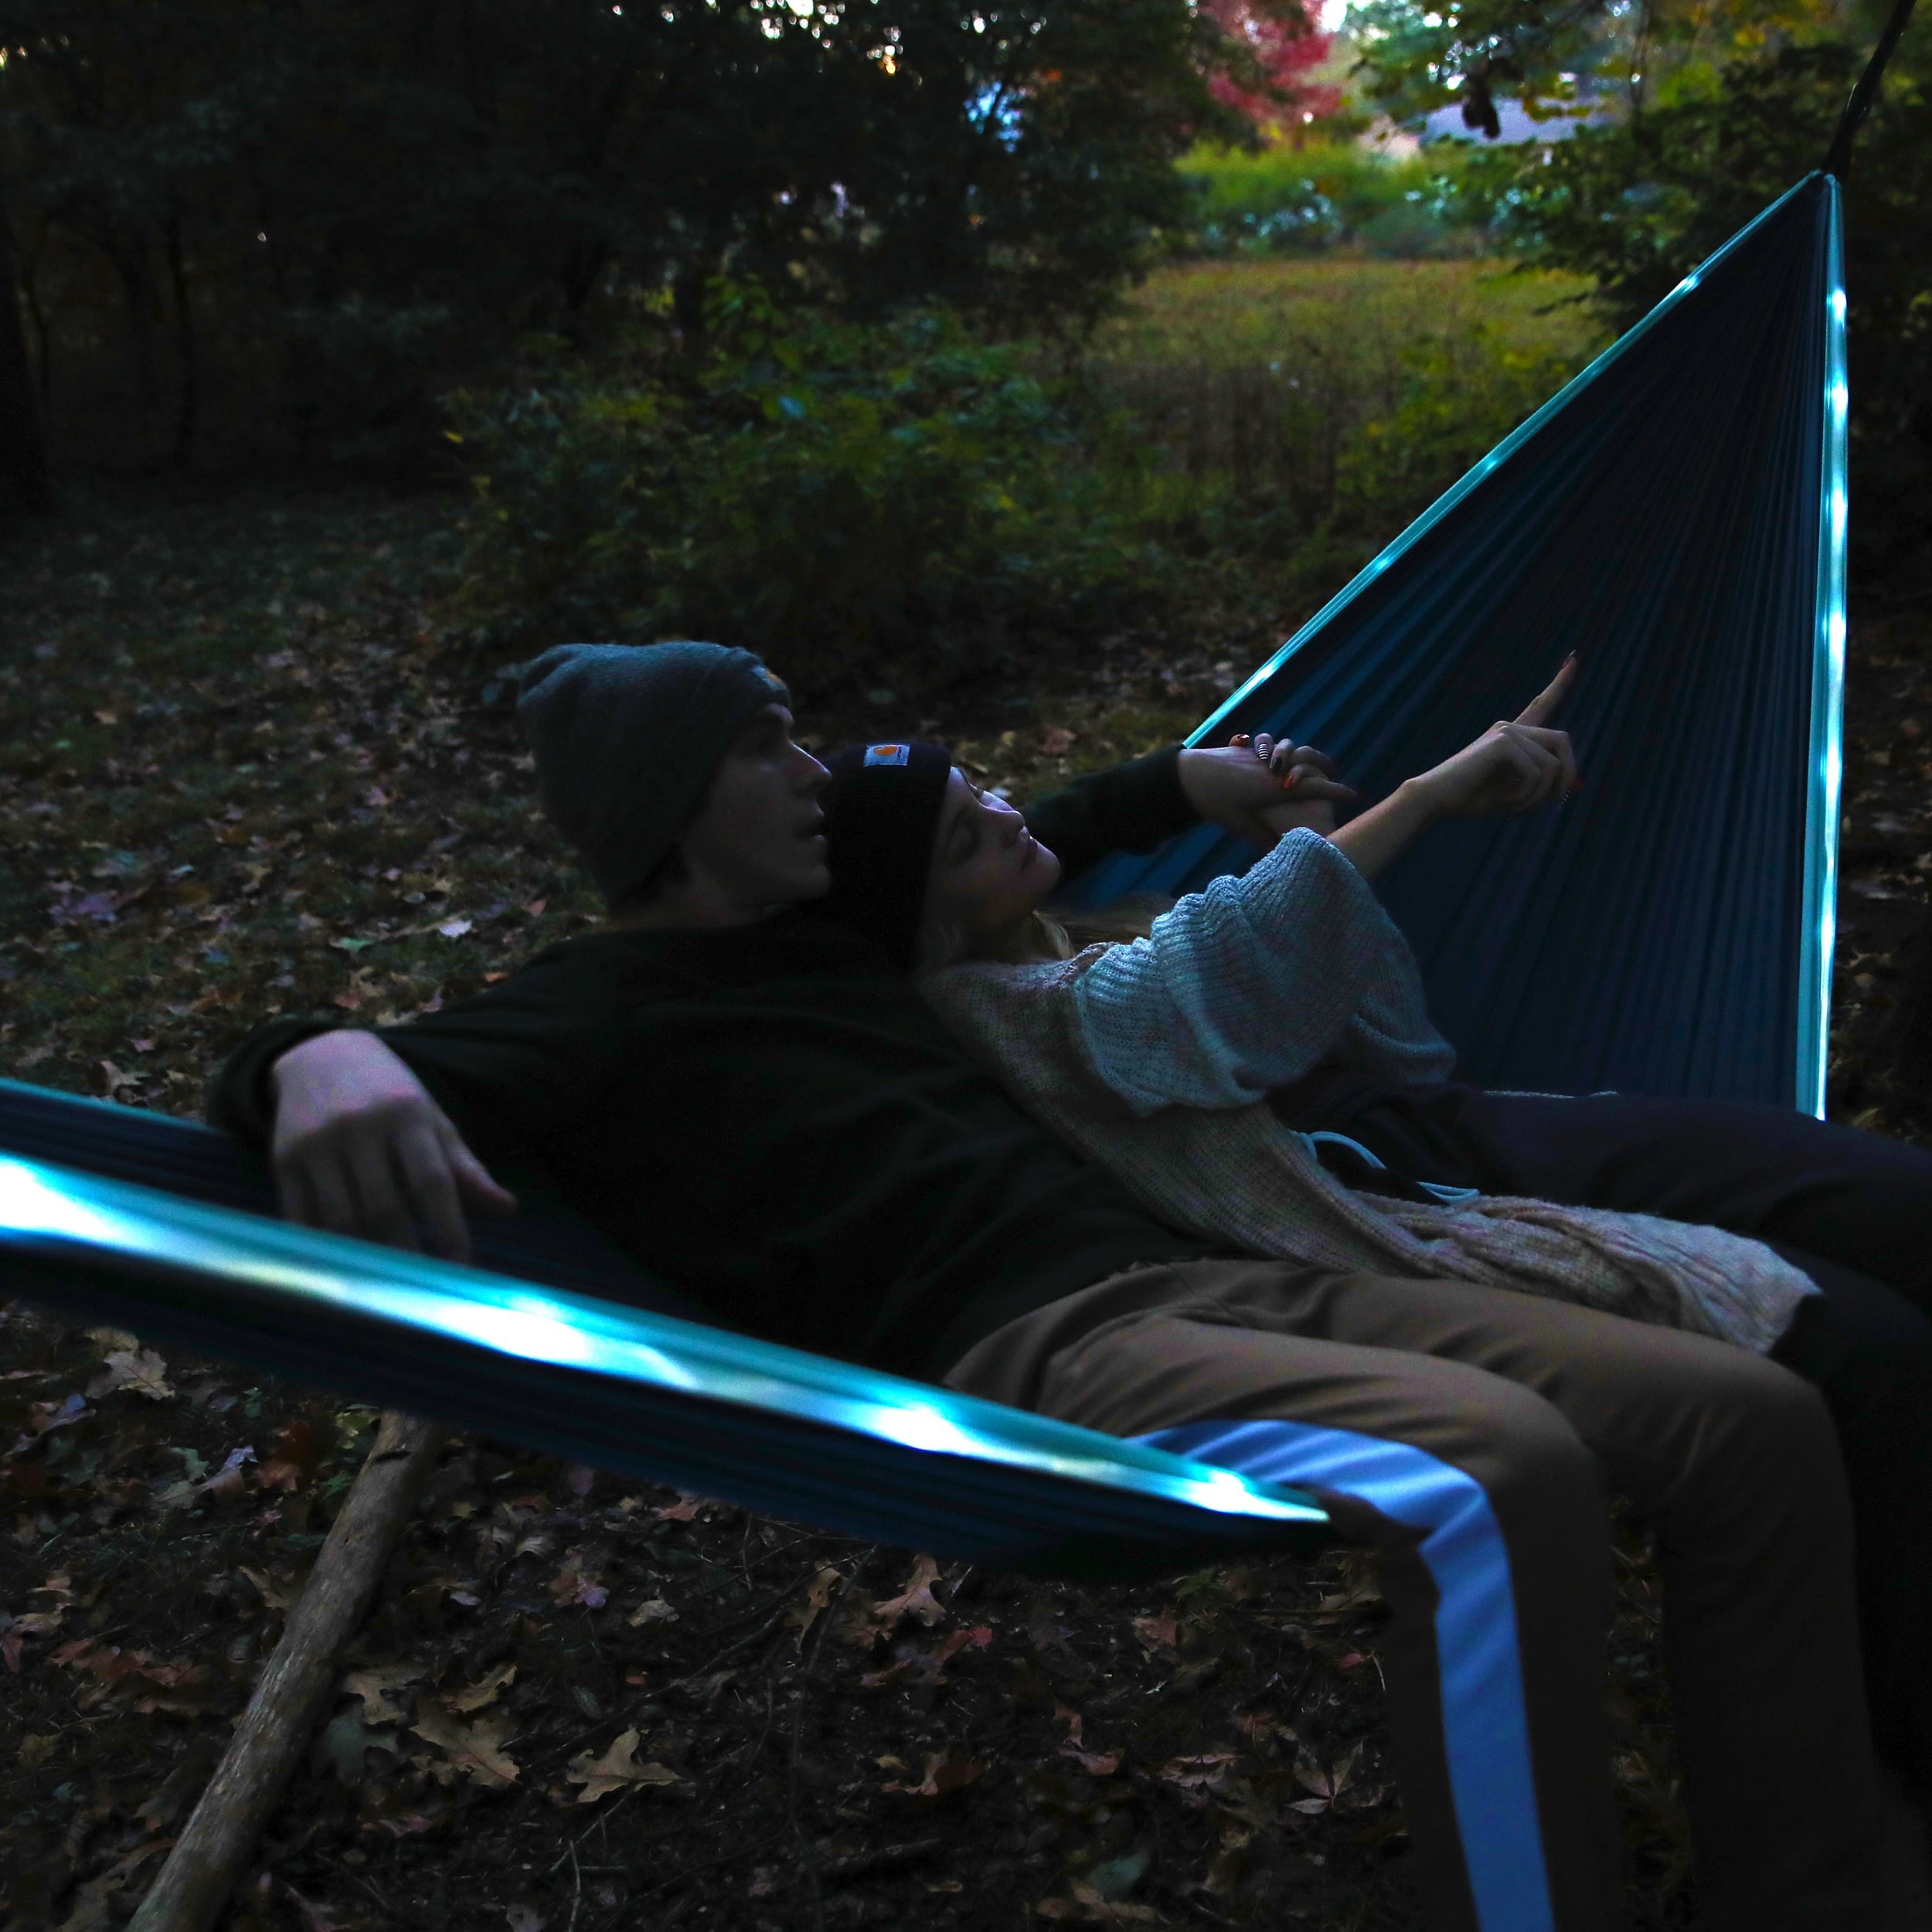 Two models sitting in hammock with blue LED lights around it